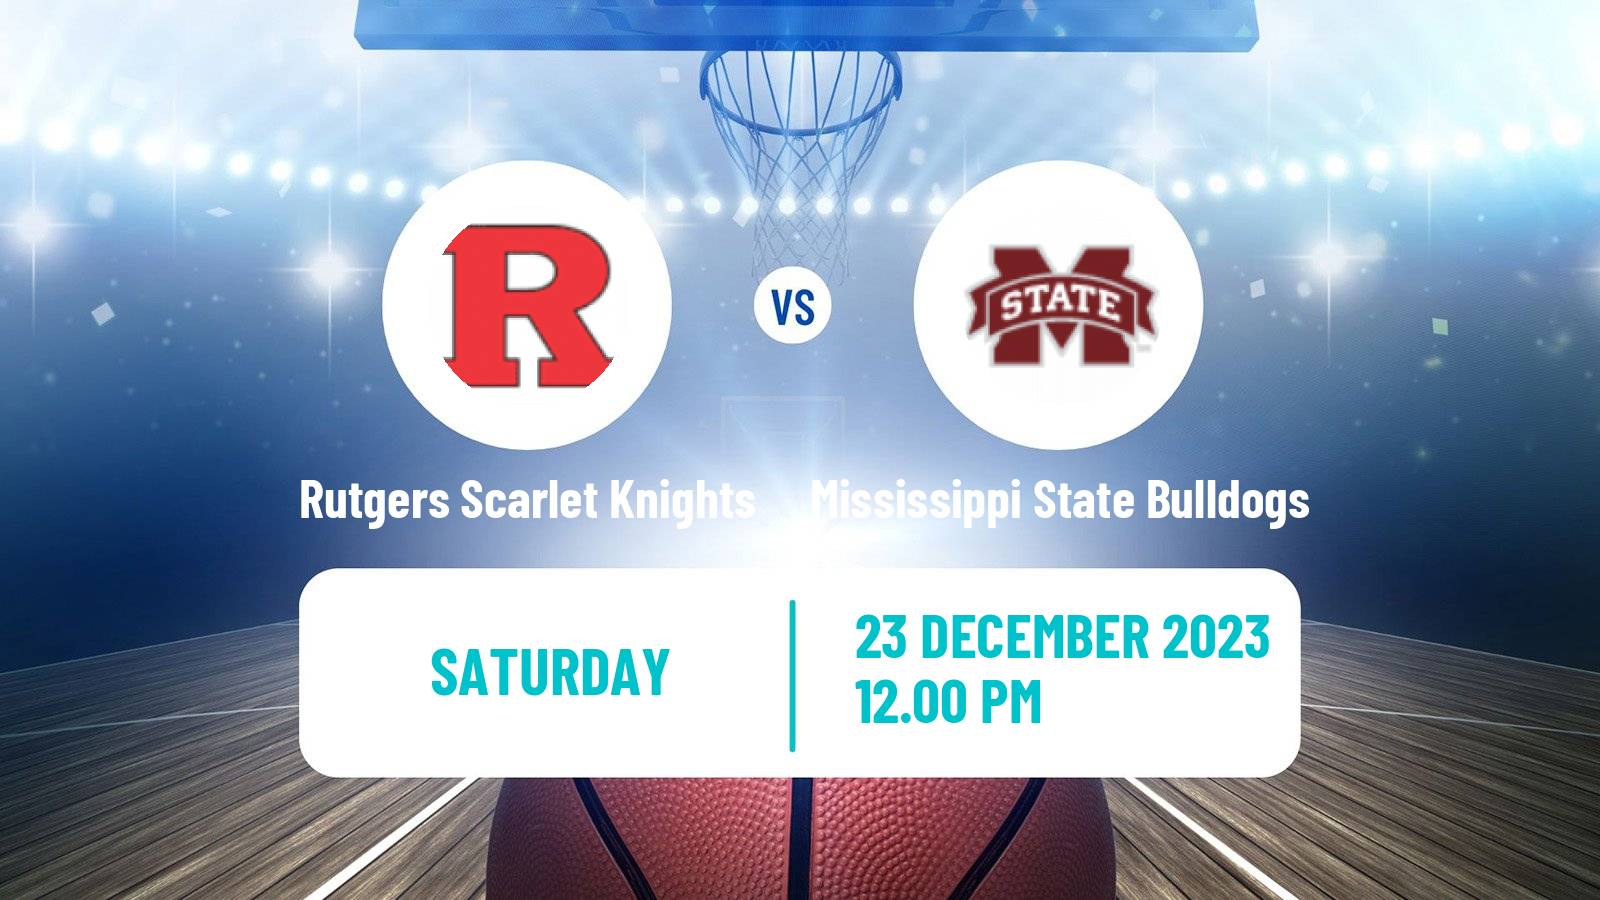 Basketball NCAA College Basketball Rutgers Scarlet Knights - Mississippi State Bulldogs